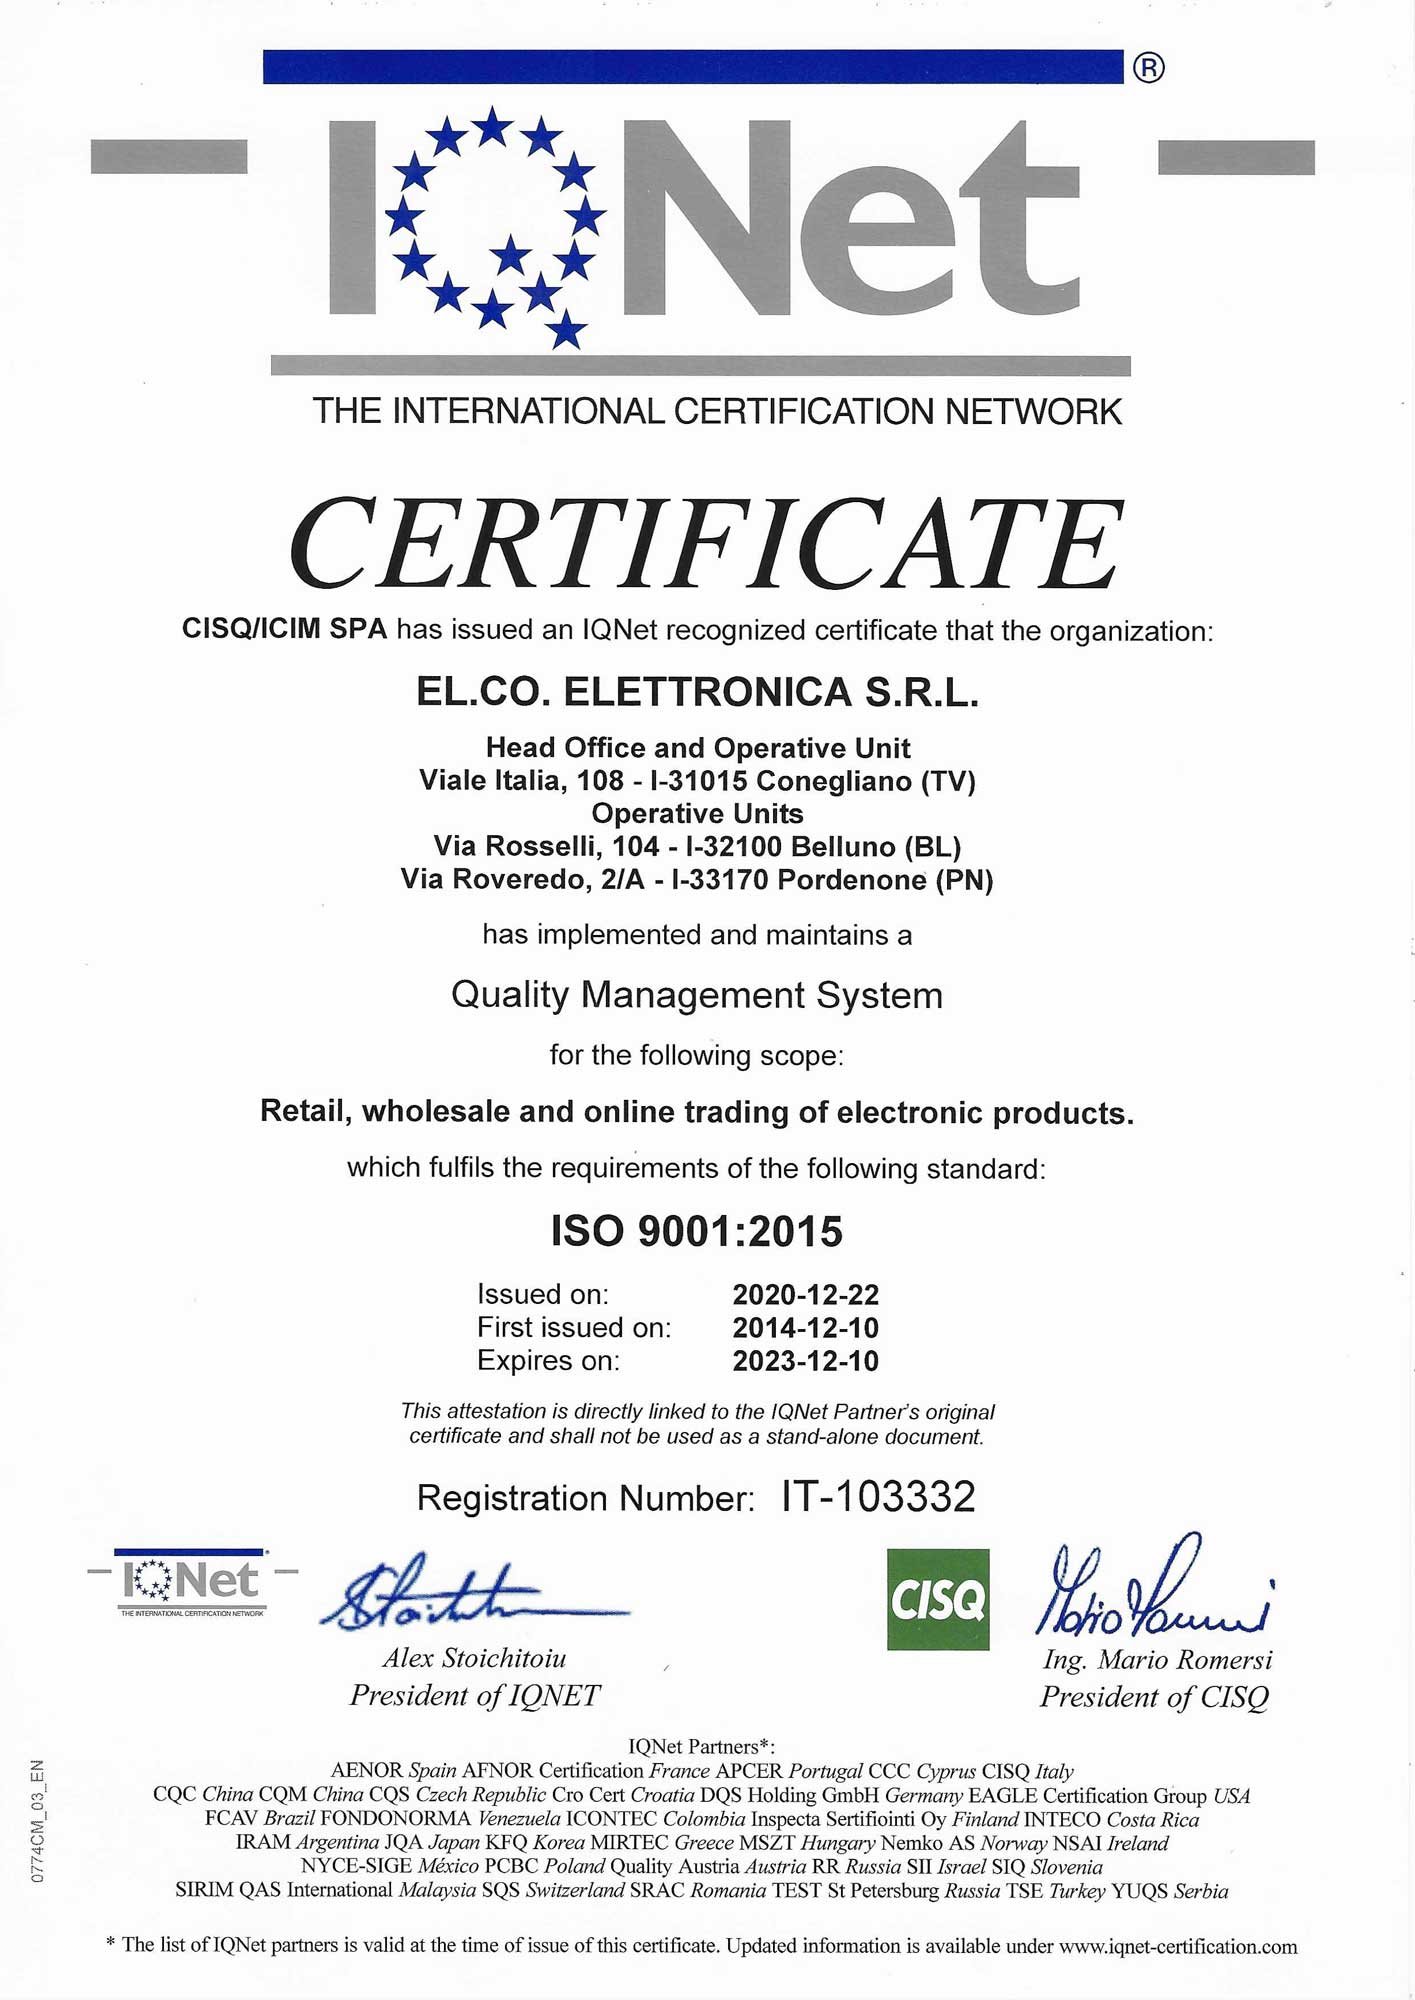 Certificato ISO 9001 IQNET scad. 2023-12-10